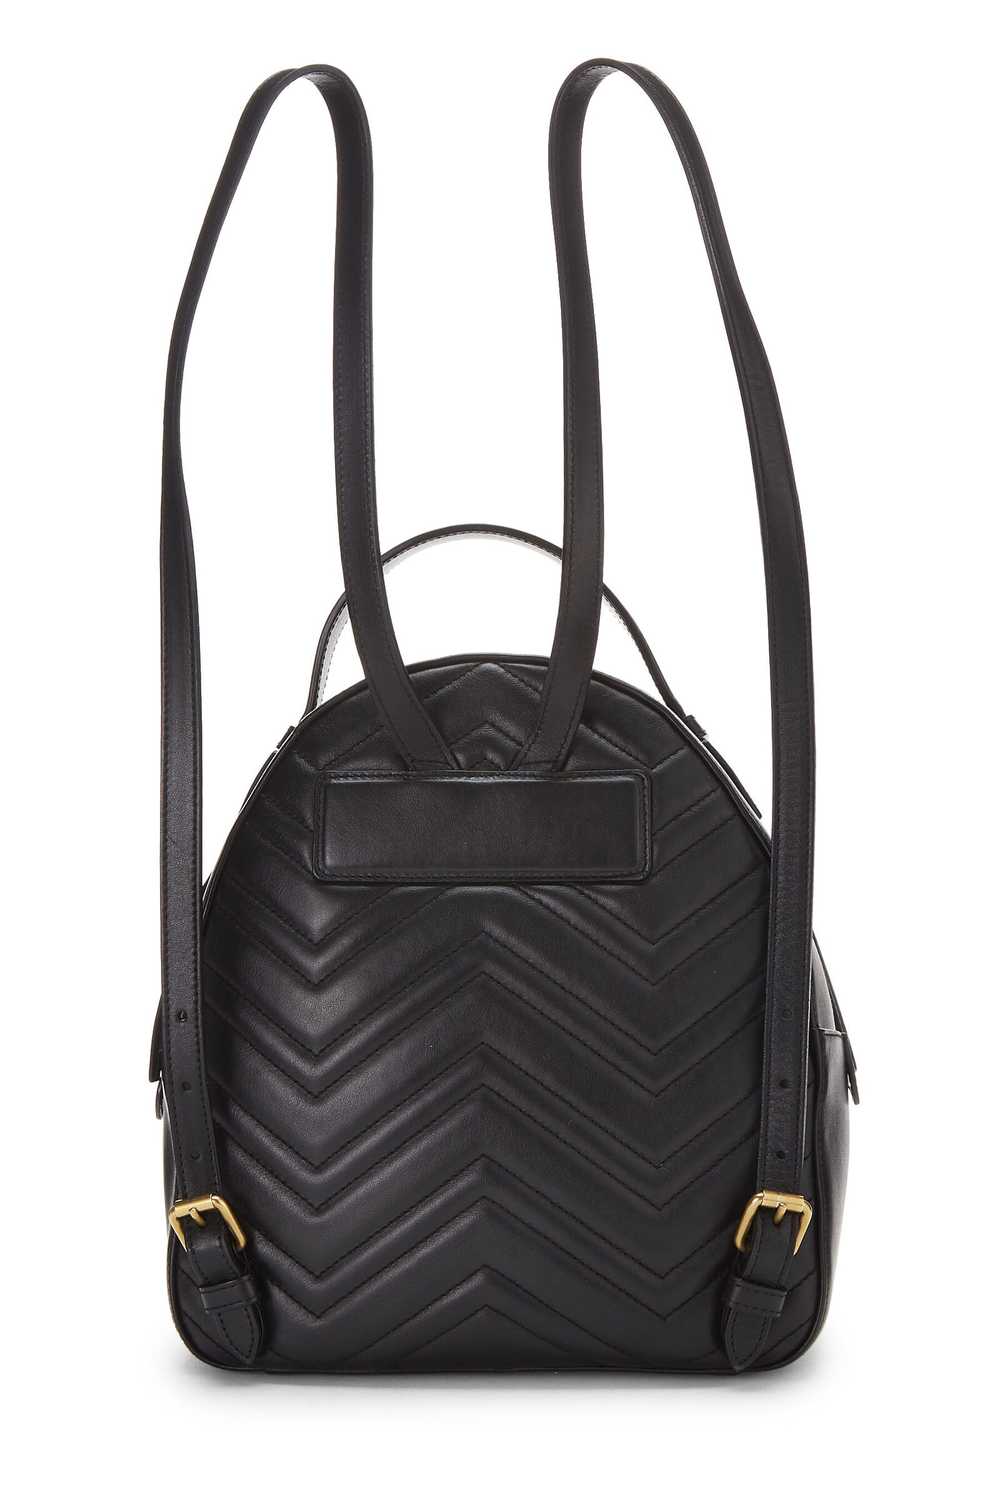 Black Leather Marmont Backpack - image 5